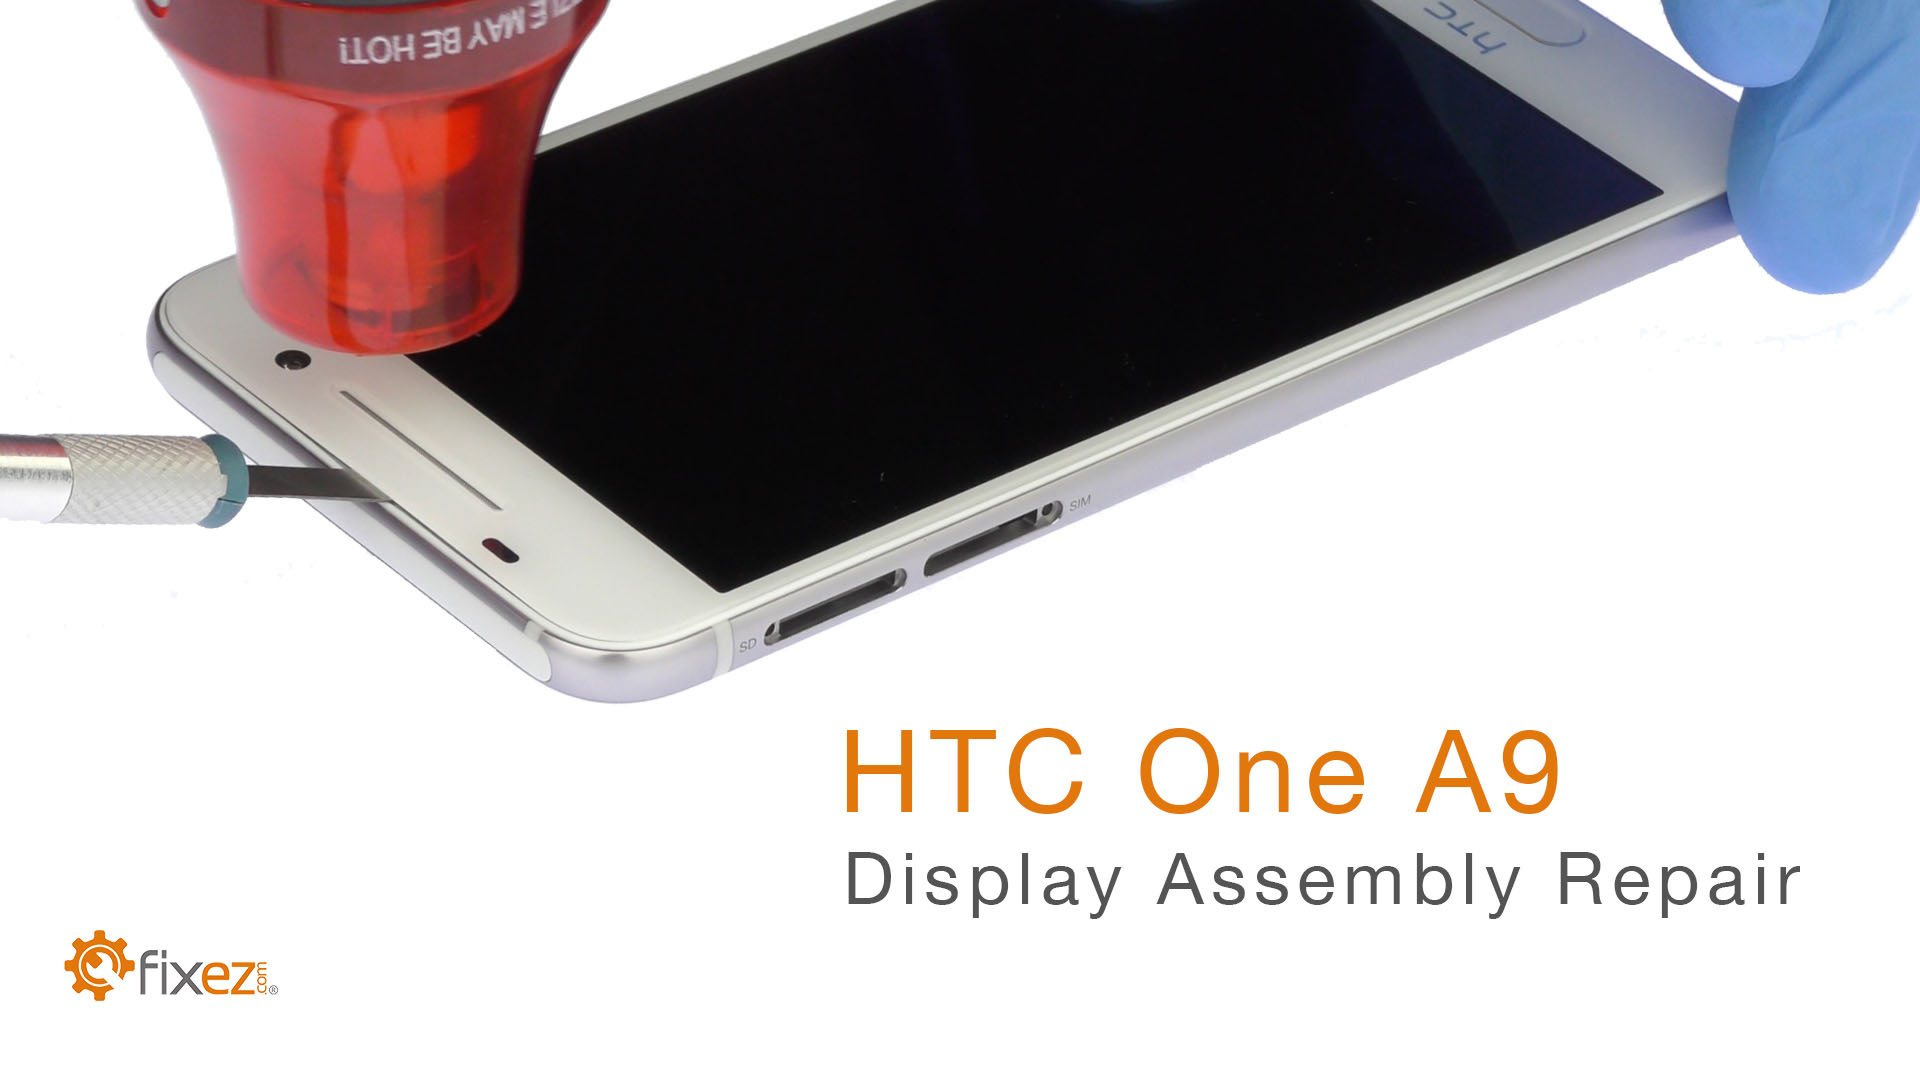 HTC One A9 Display Assembly Repair